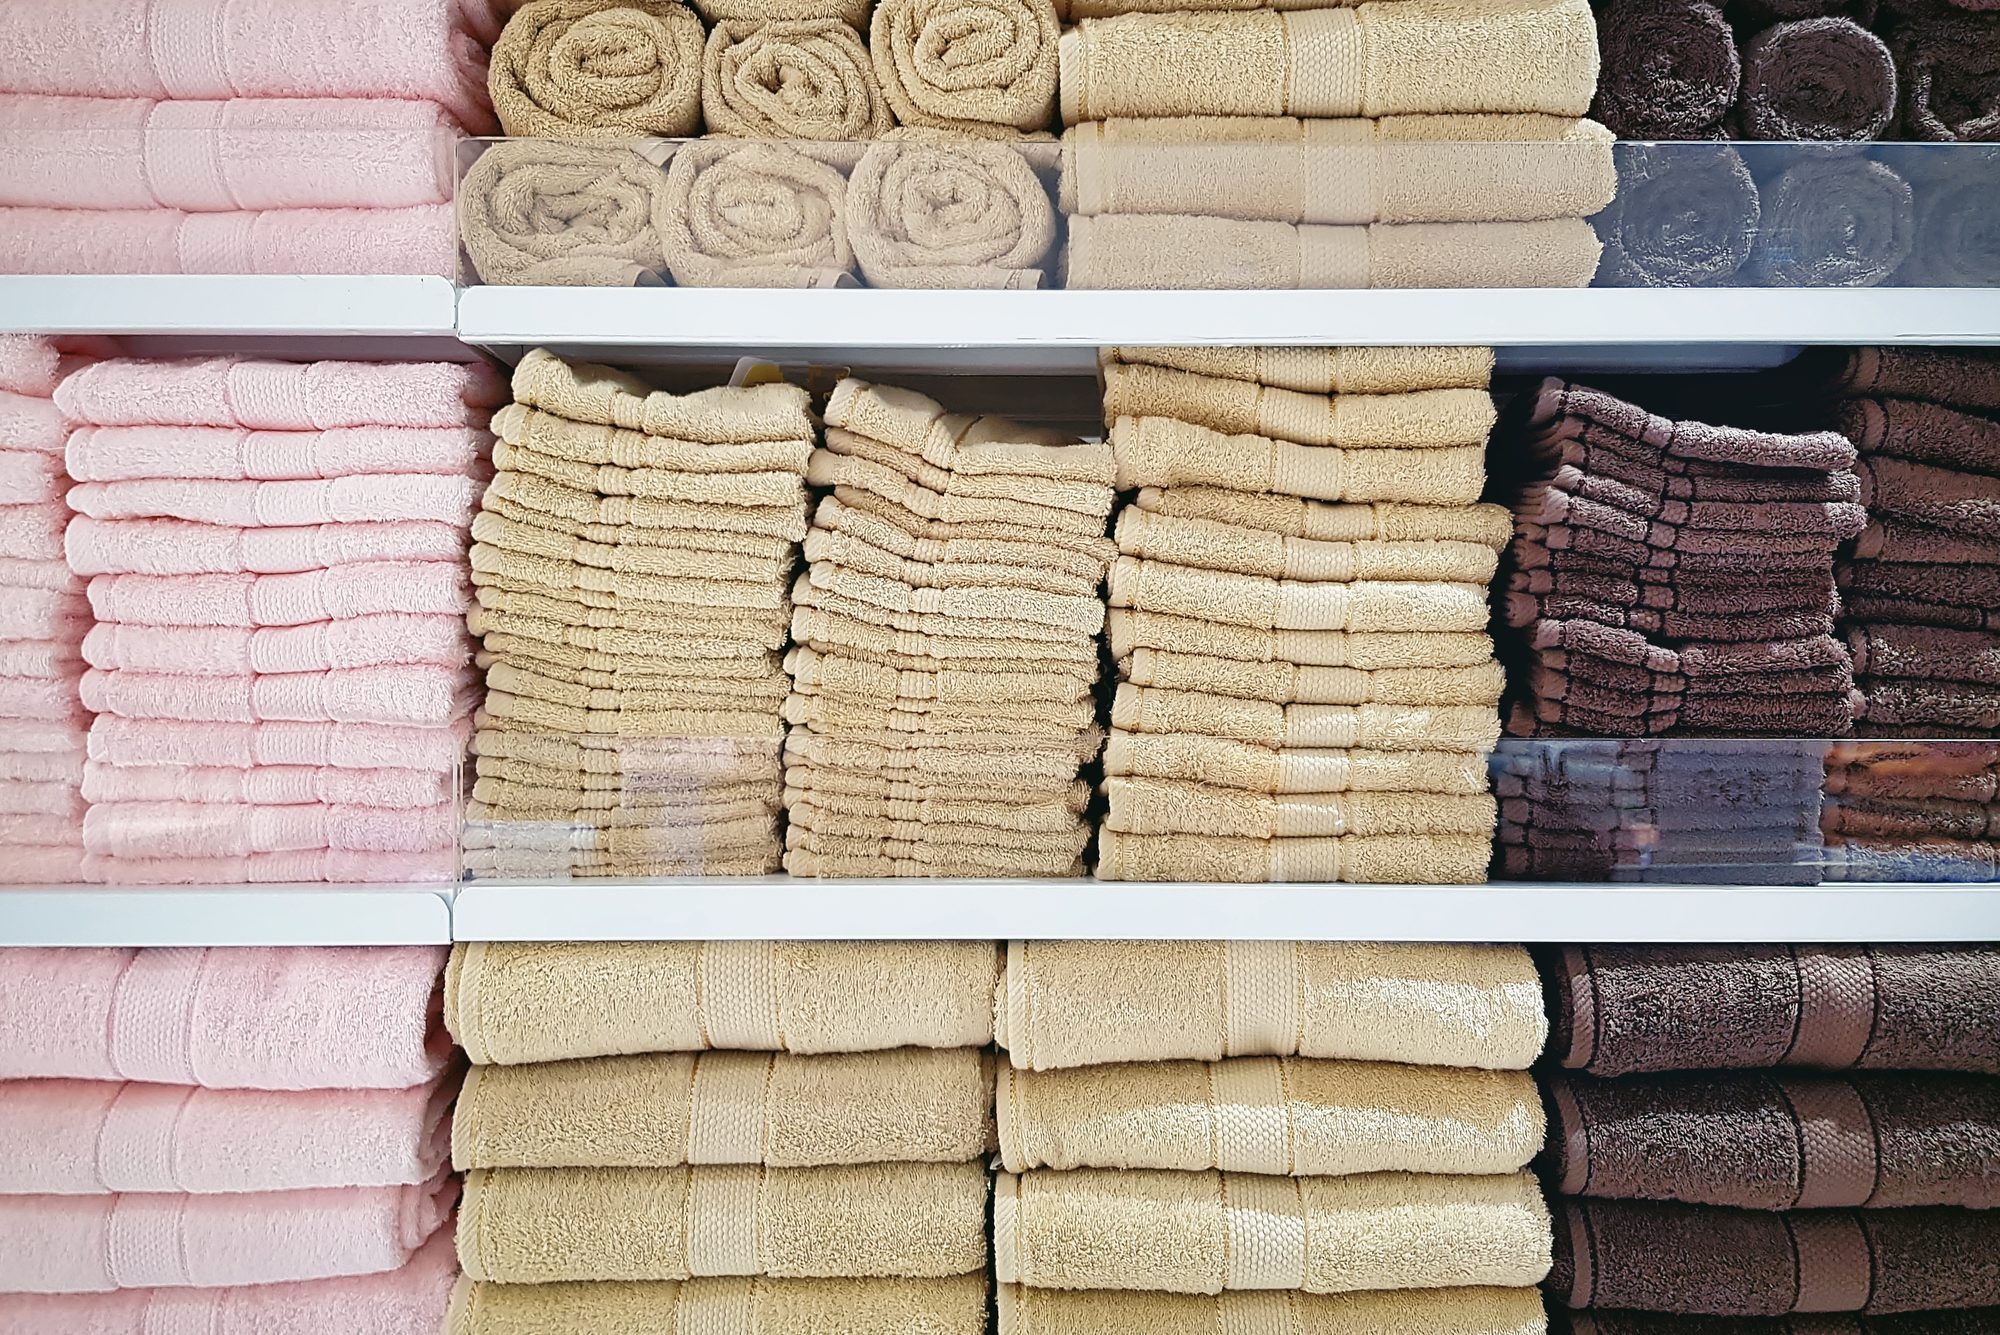 Bath Towels Buying Guide